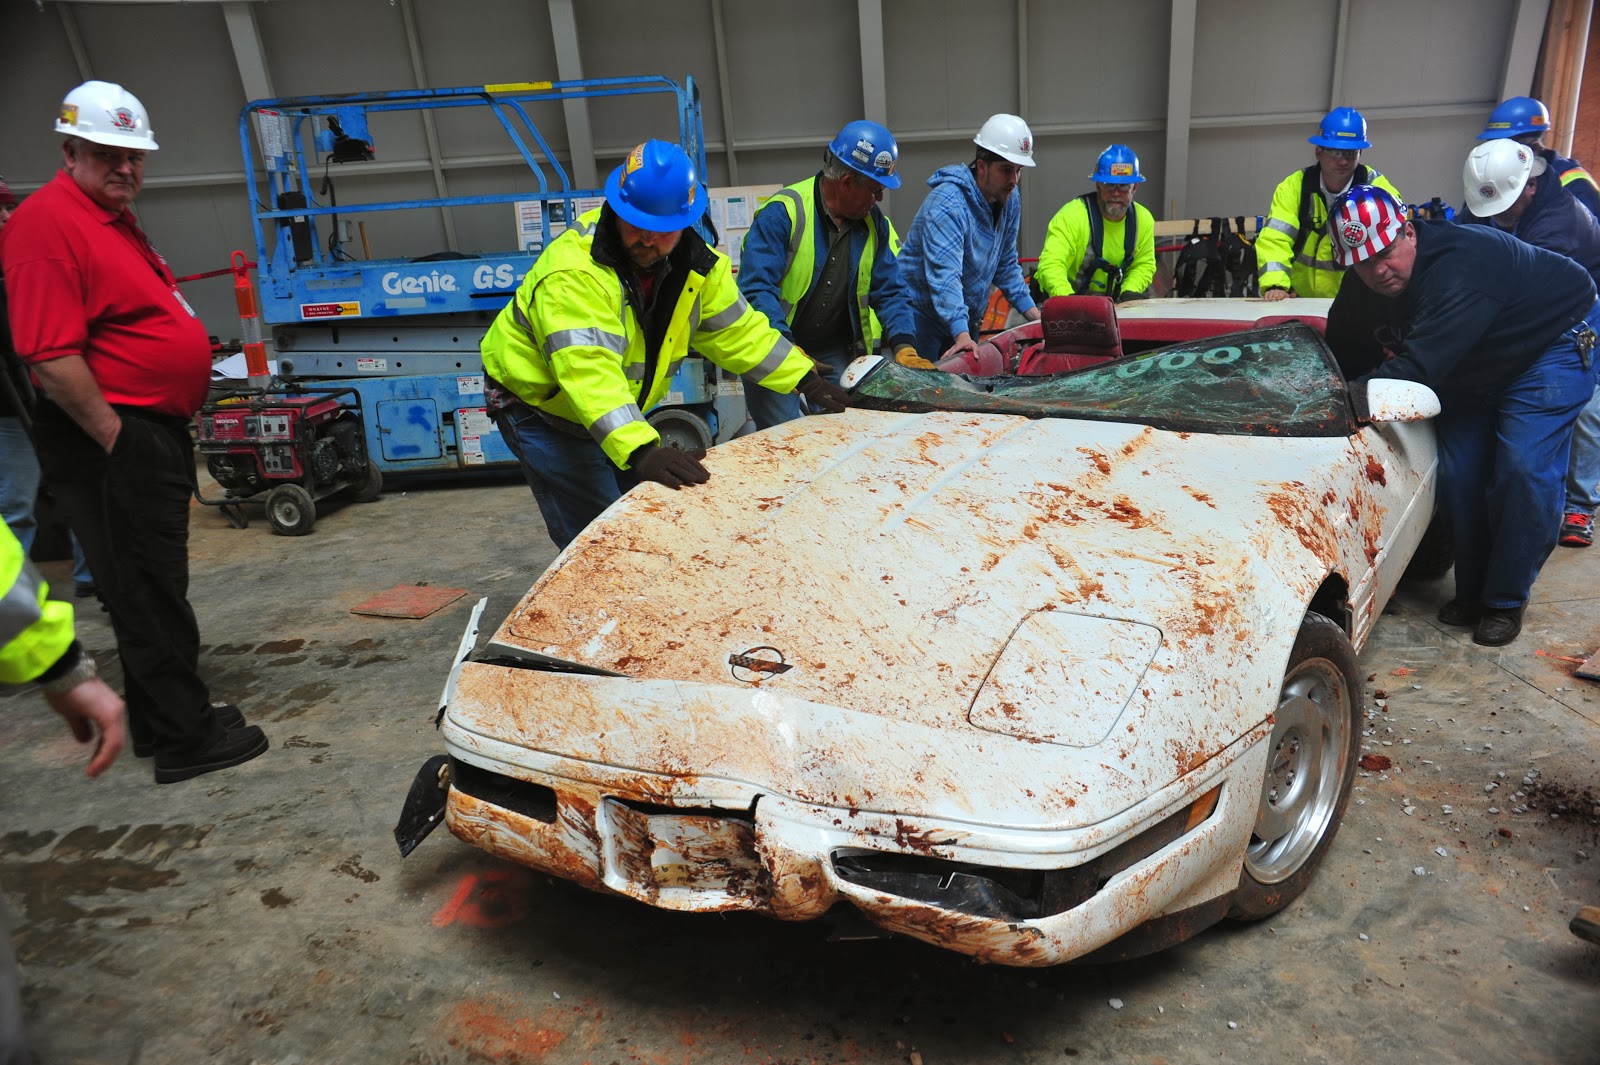 How The Corvette Museum Rescued Its Cars From A Giant Sinkhole